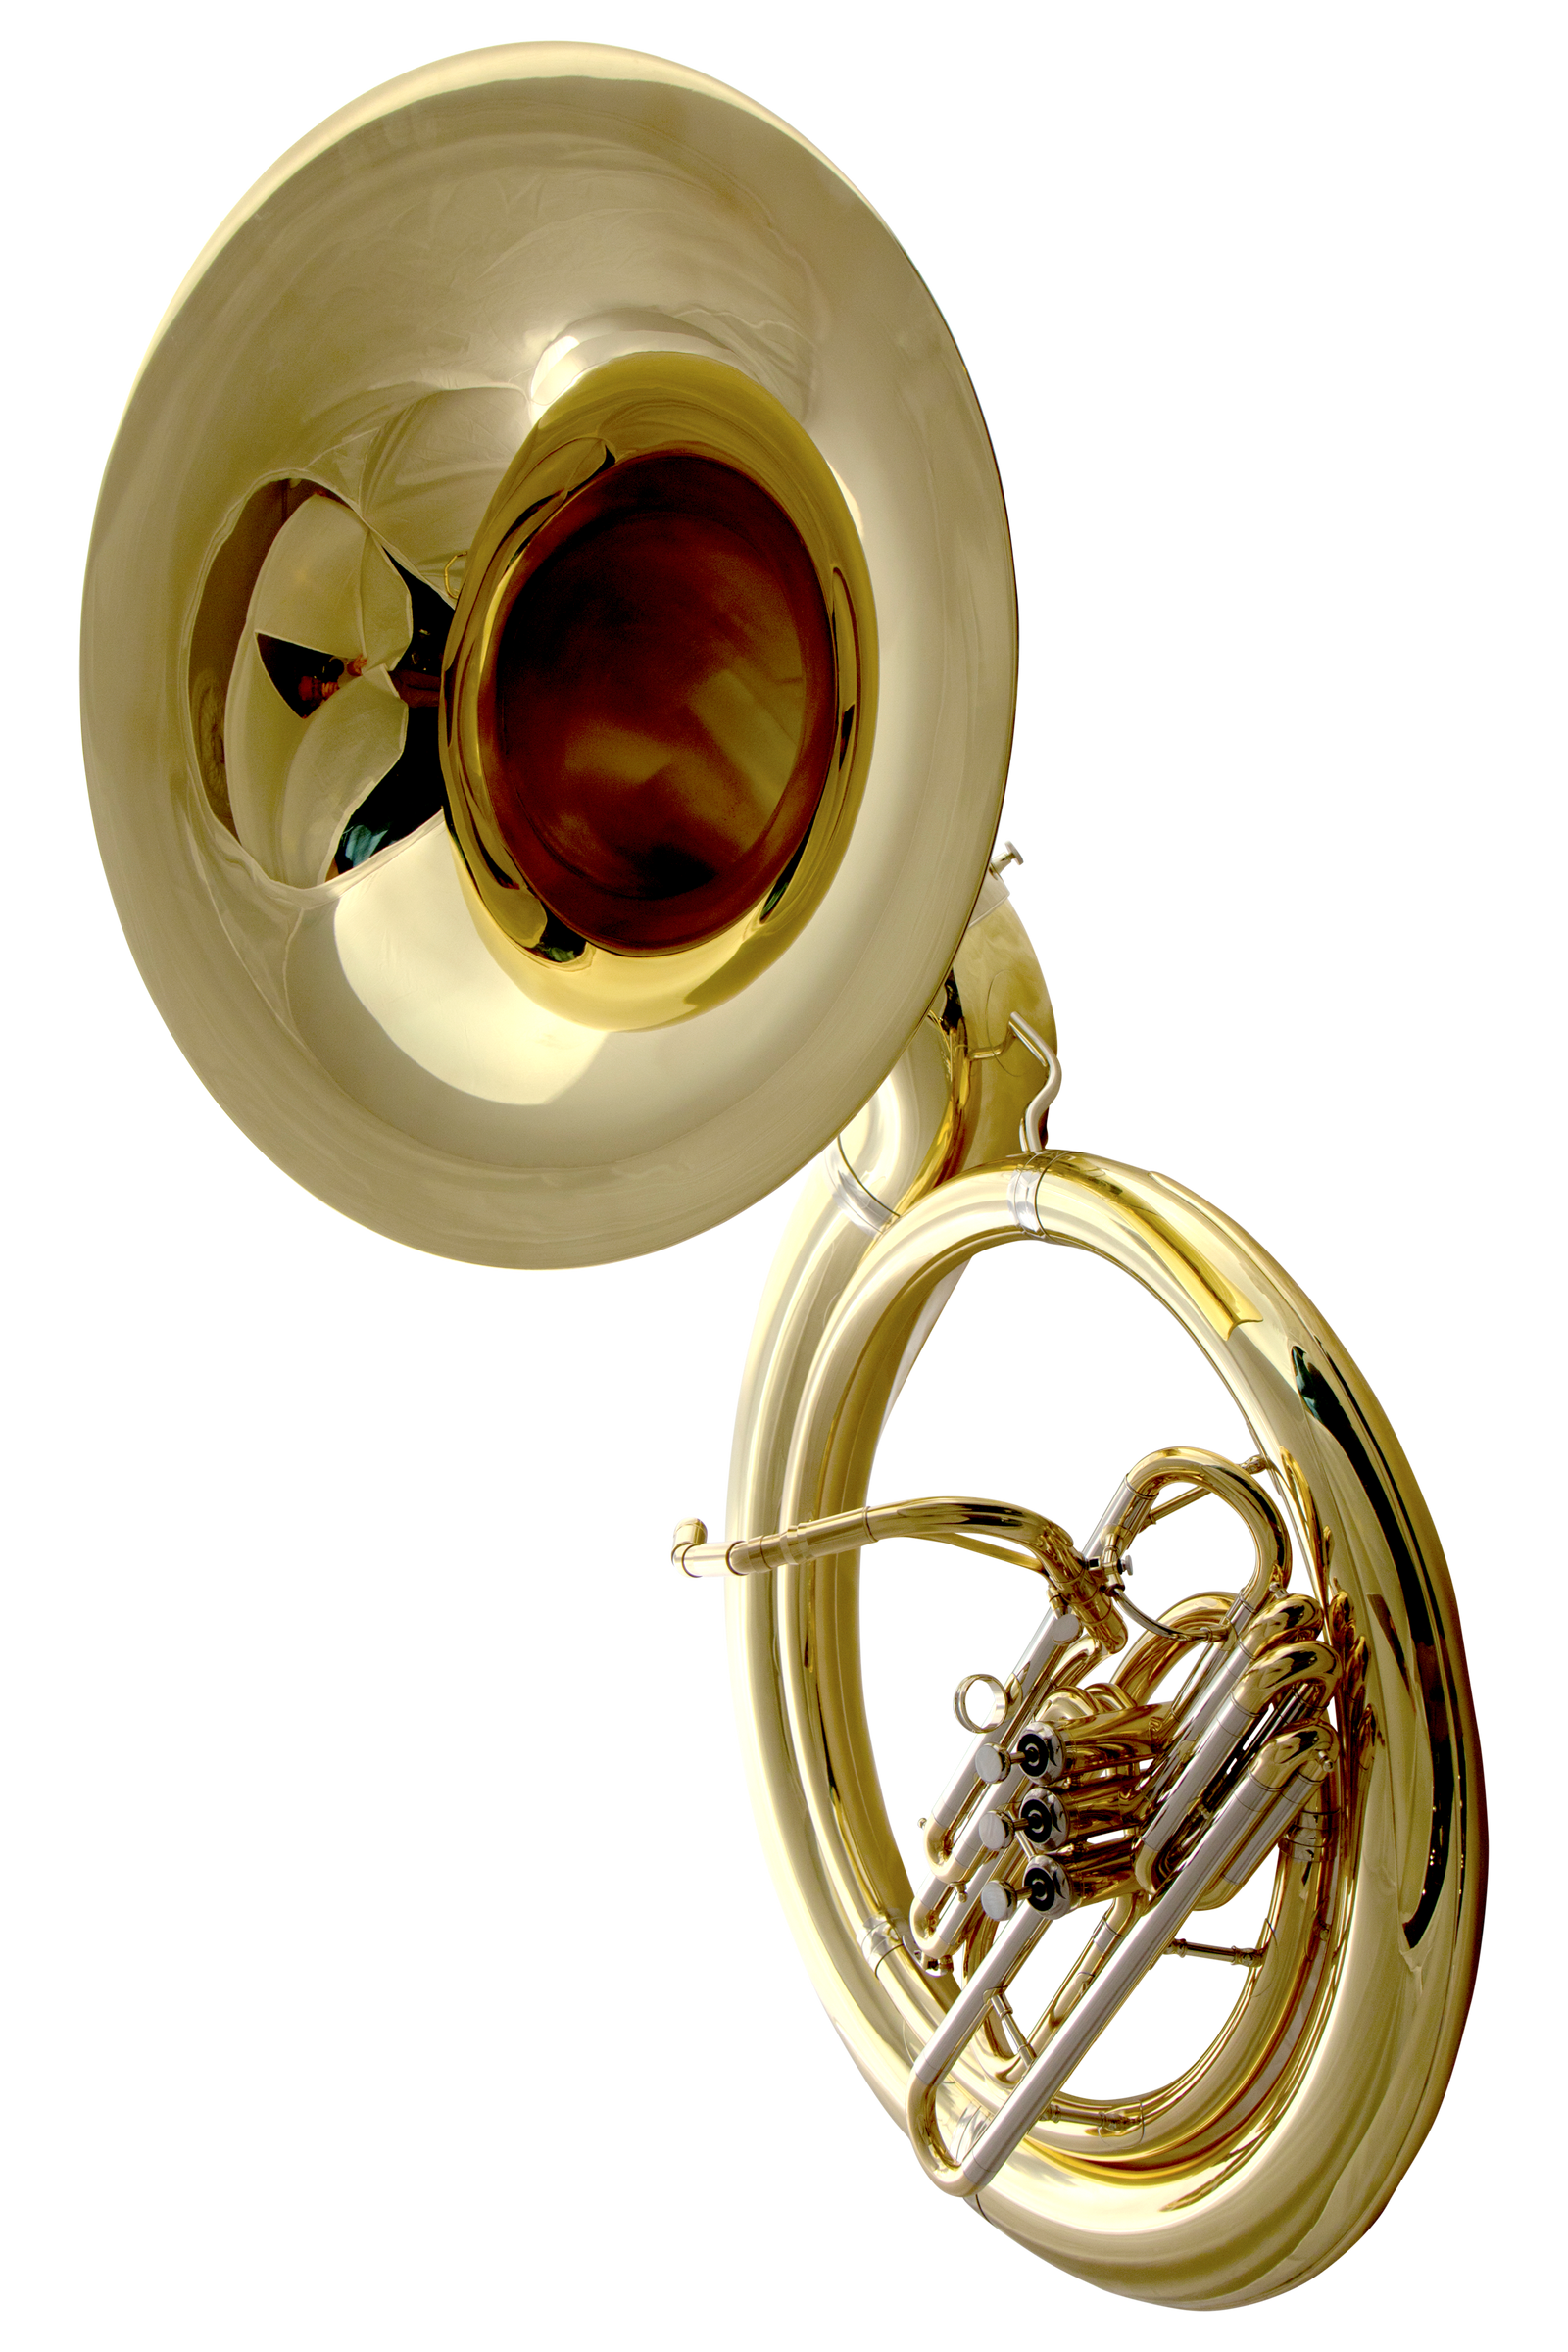 Shiny John Packer JP2057 Sousaphone with large bell and responsive valves, ideal for marching bands.